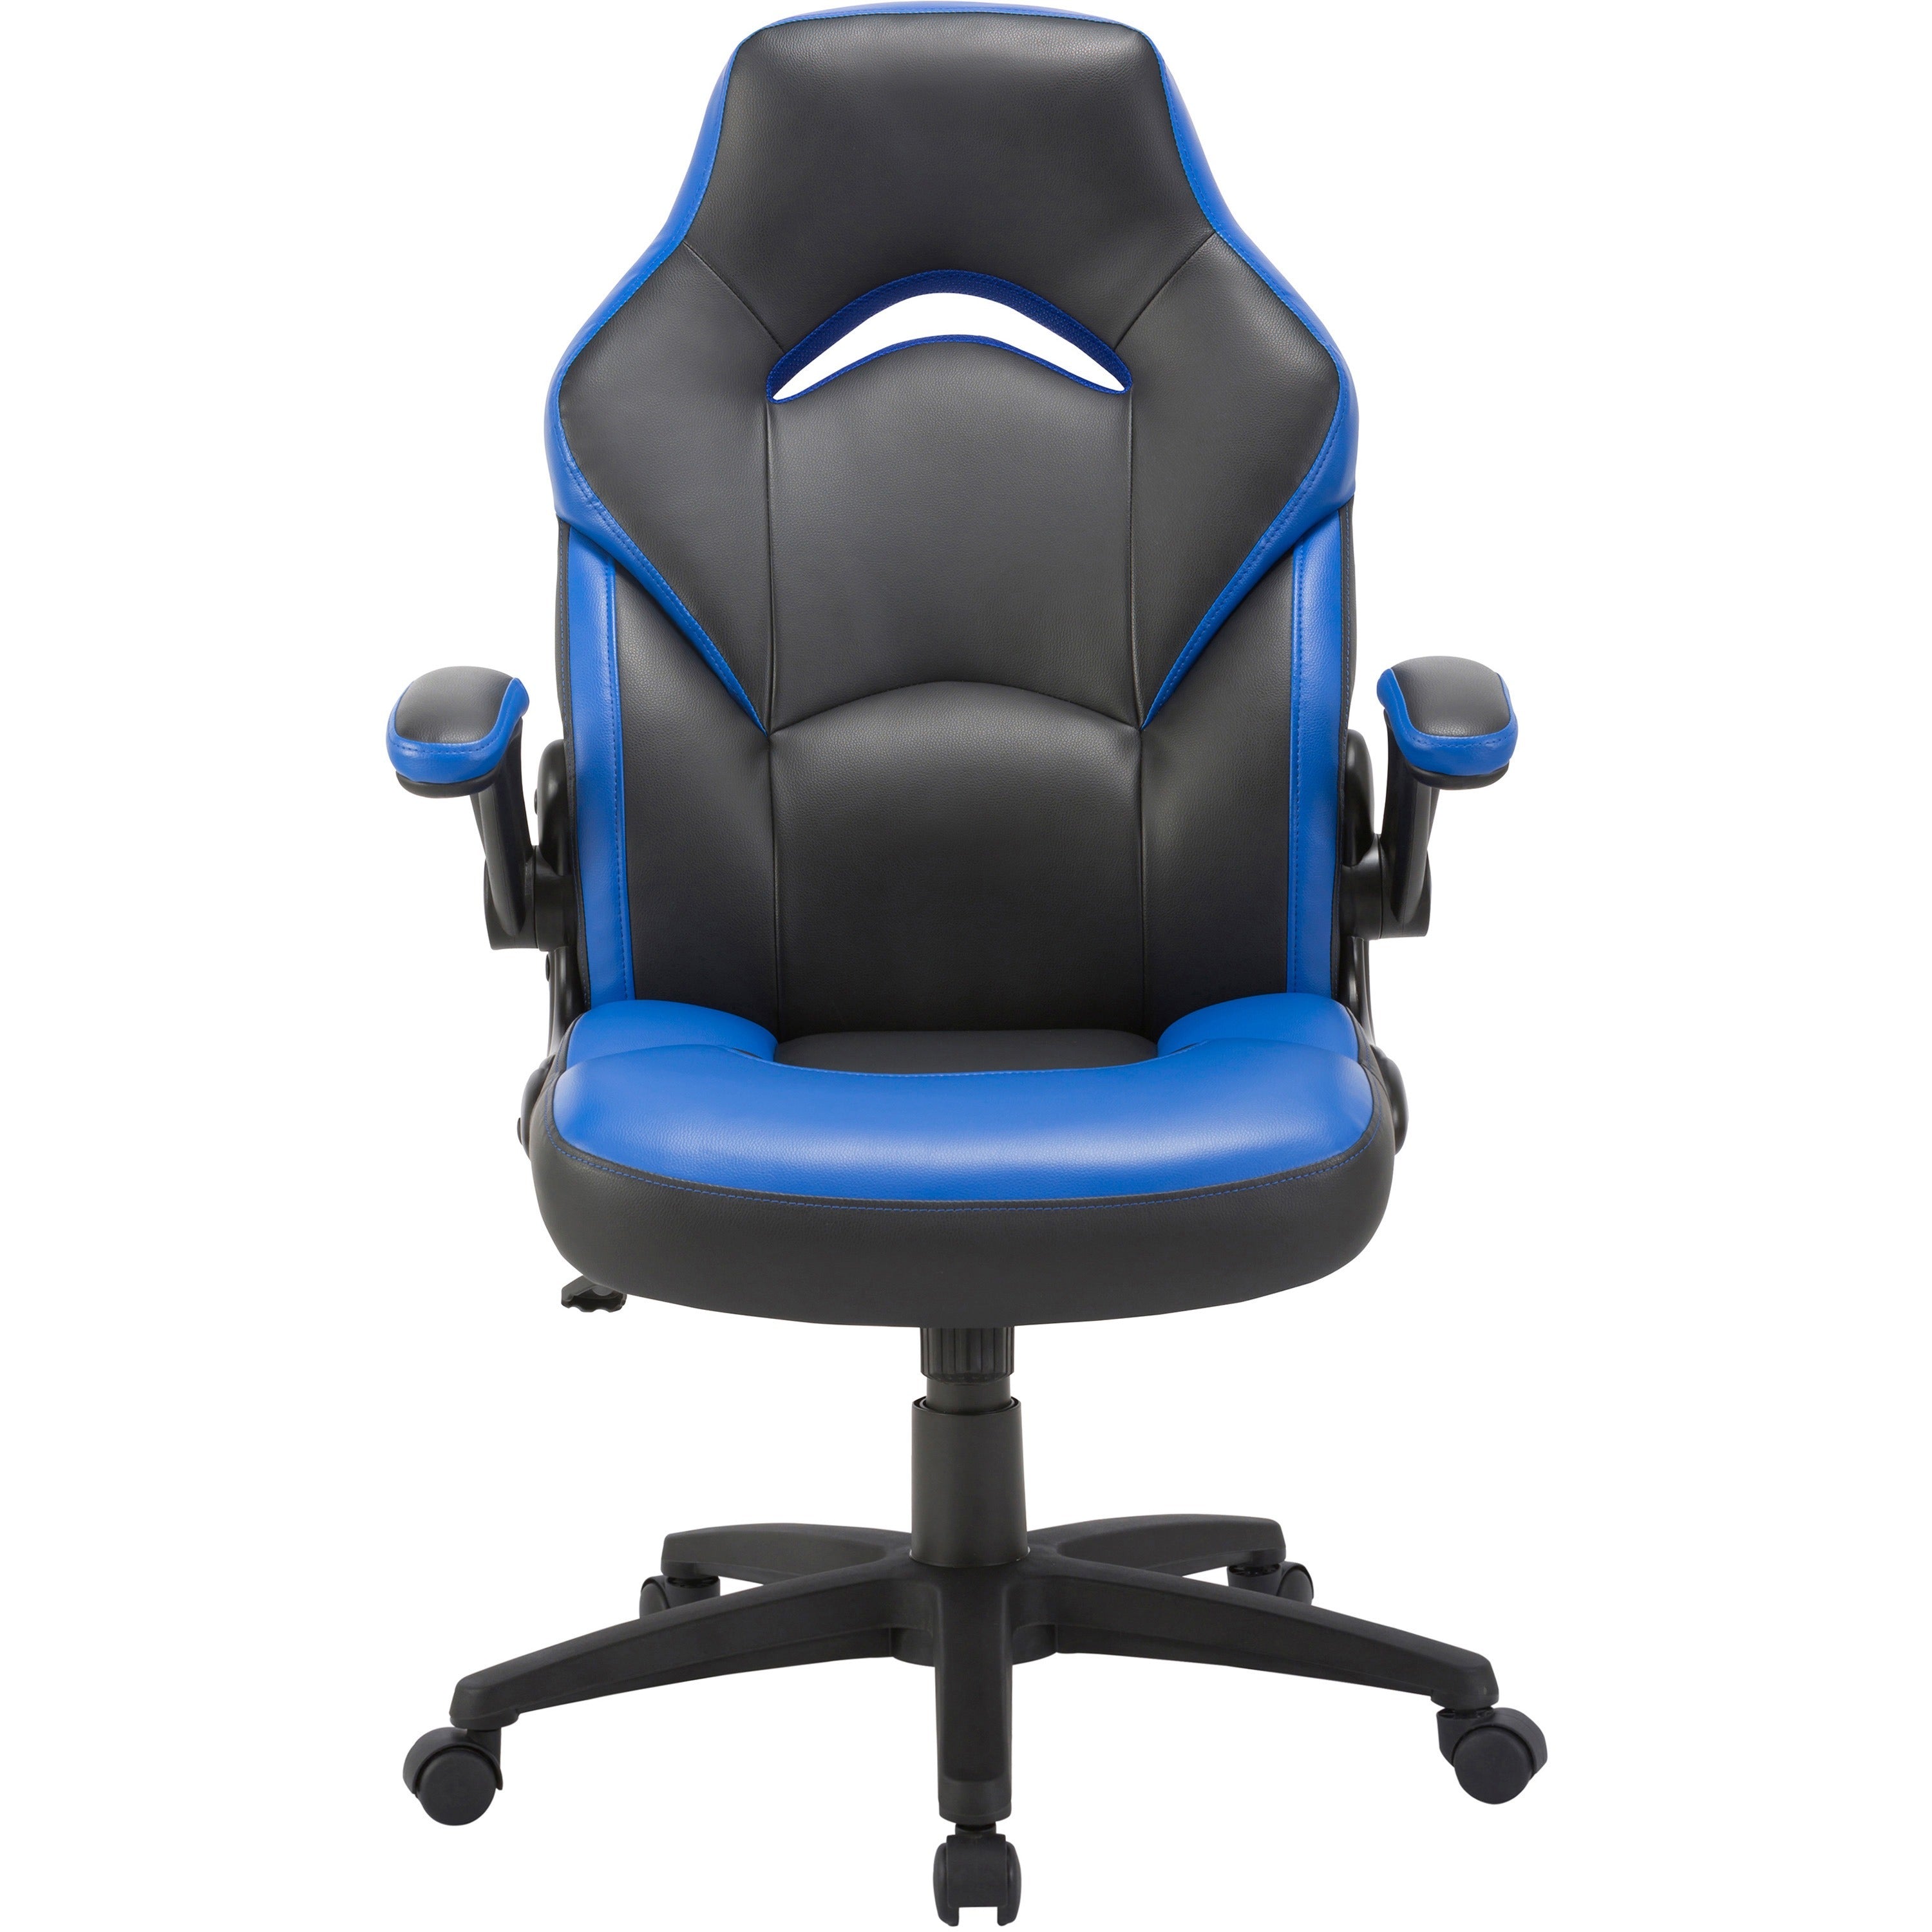 lys-high-back-gaming-chair-for-gaming-blue-black_lysch701pabe - 3